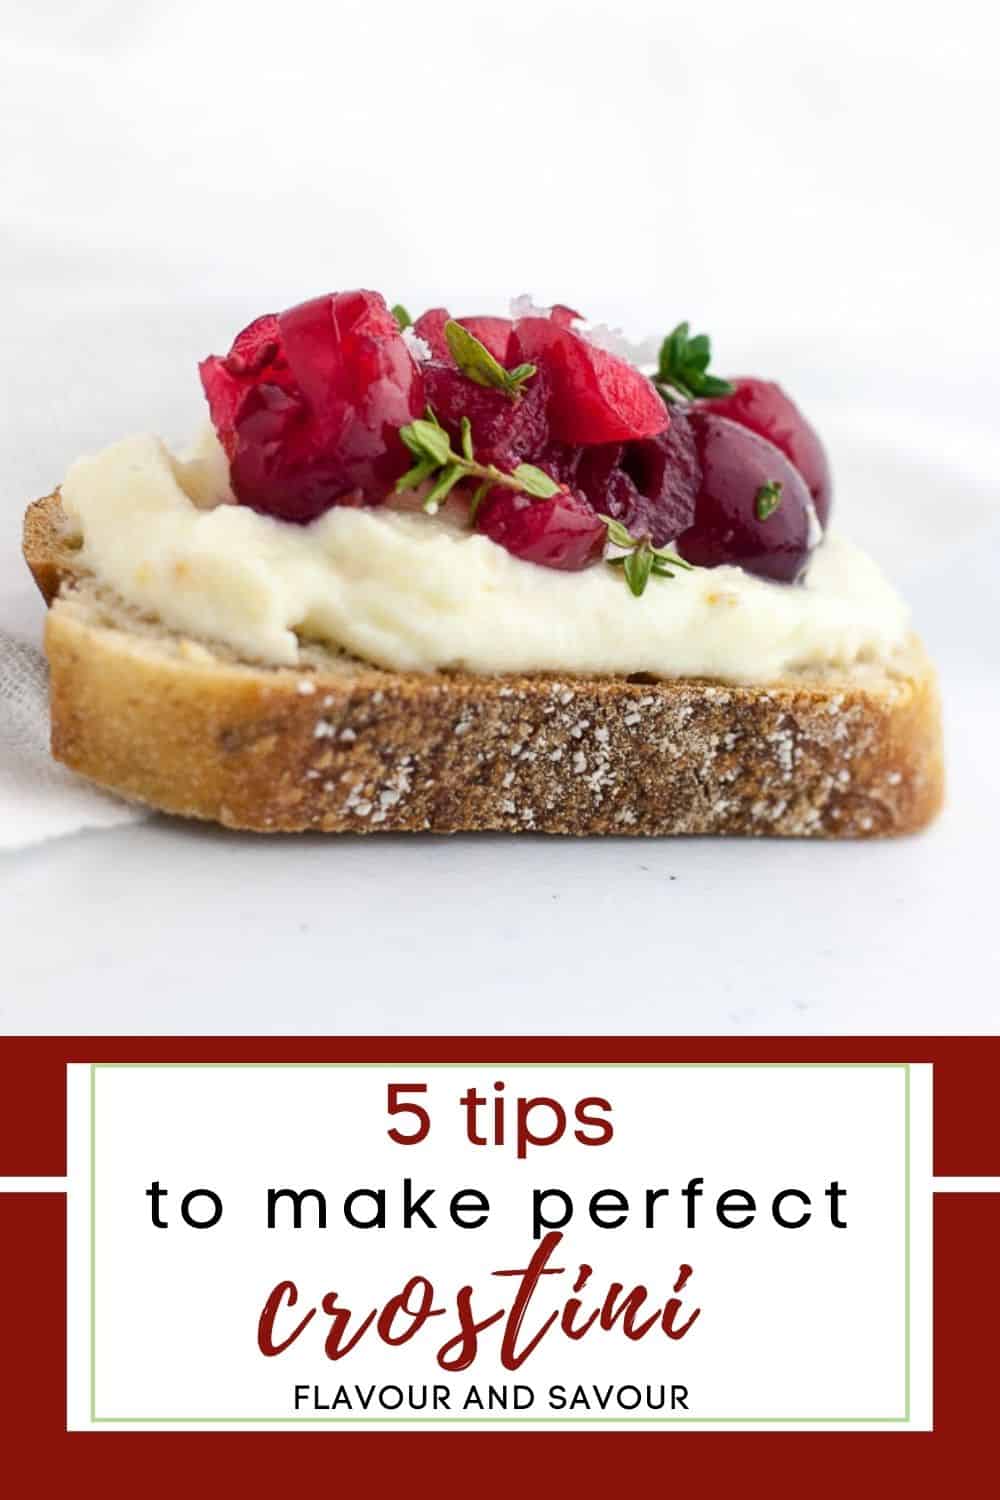 image with text for 5 tips to make perfect crostini